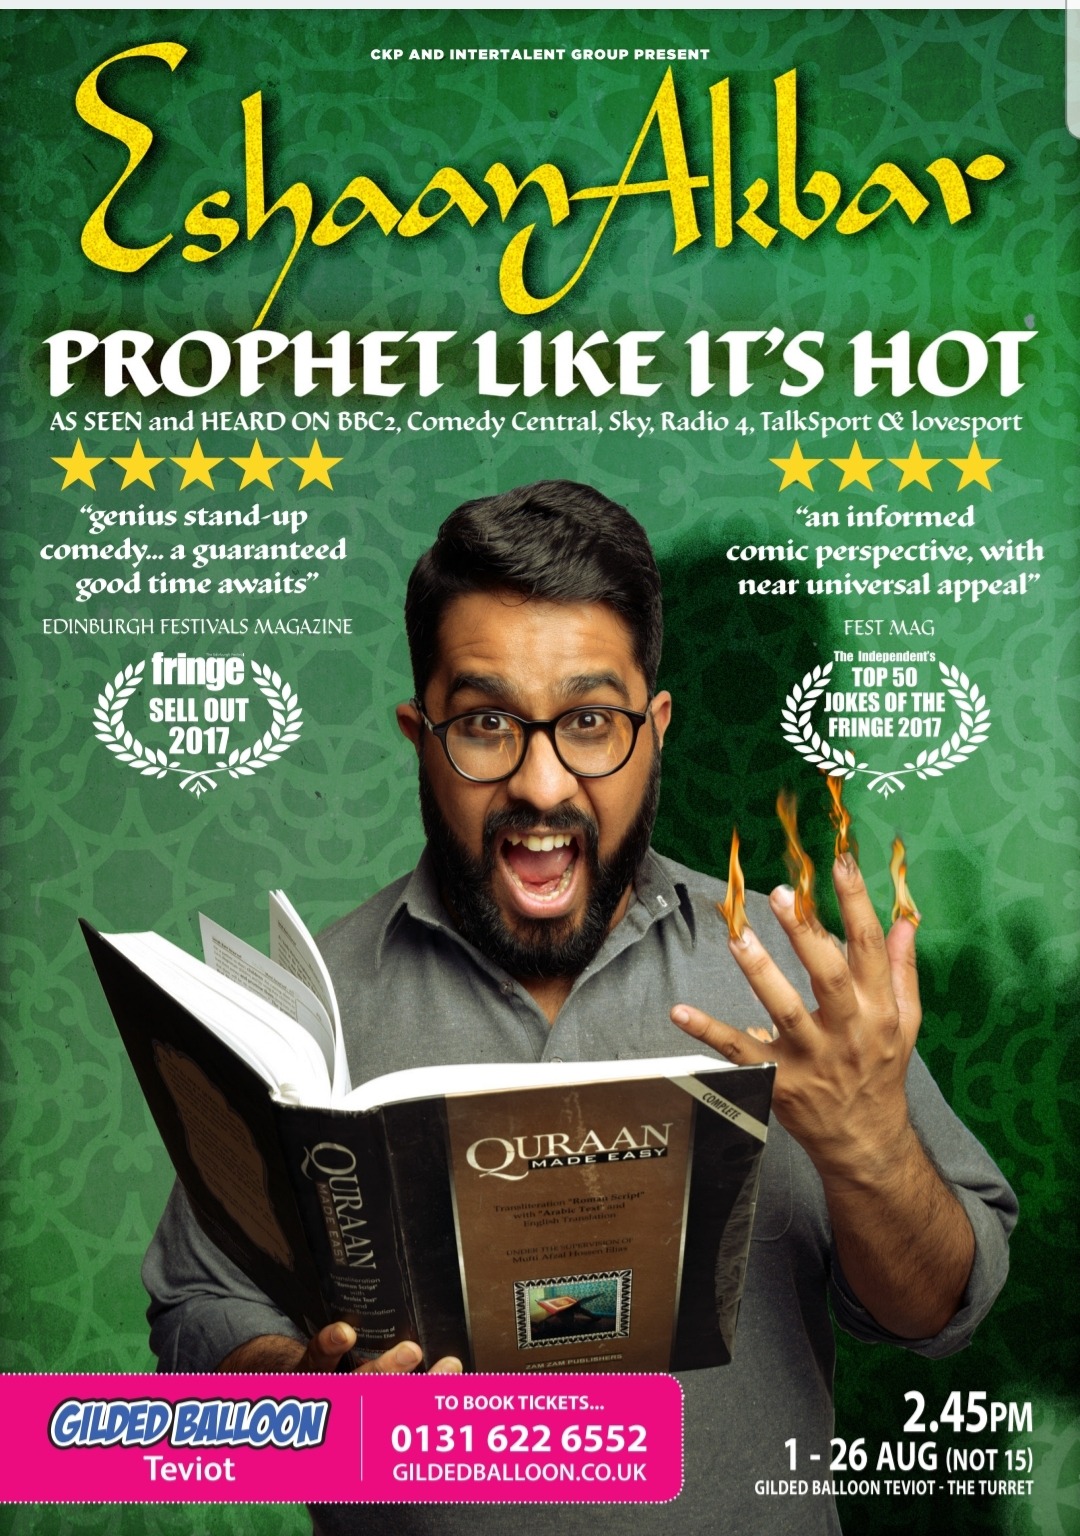 The poster for Eshaan Akbar: Prophet Like It's Hot